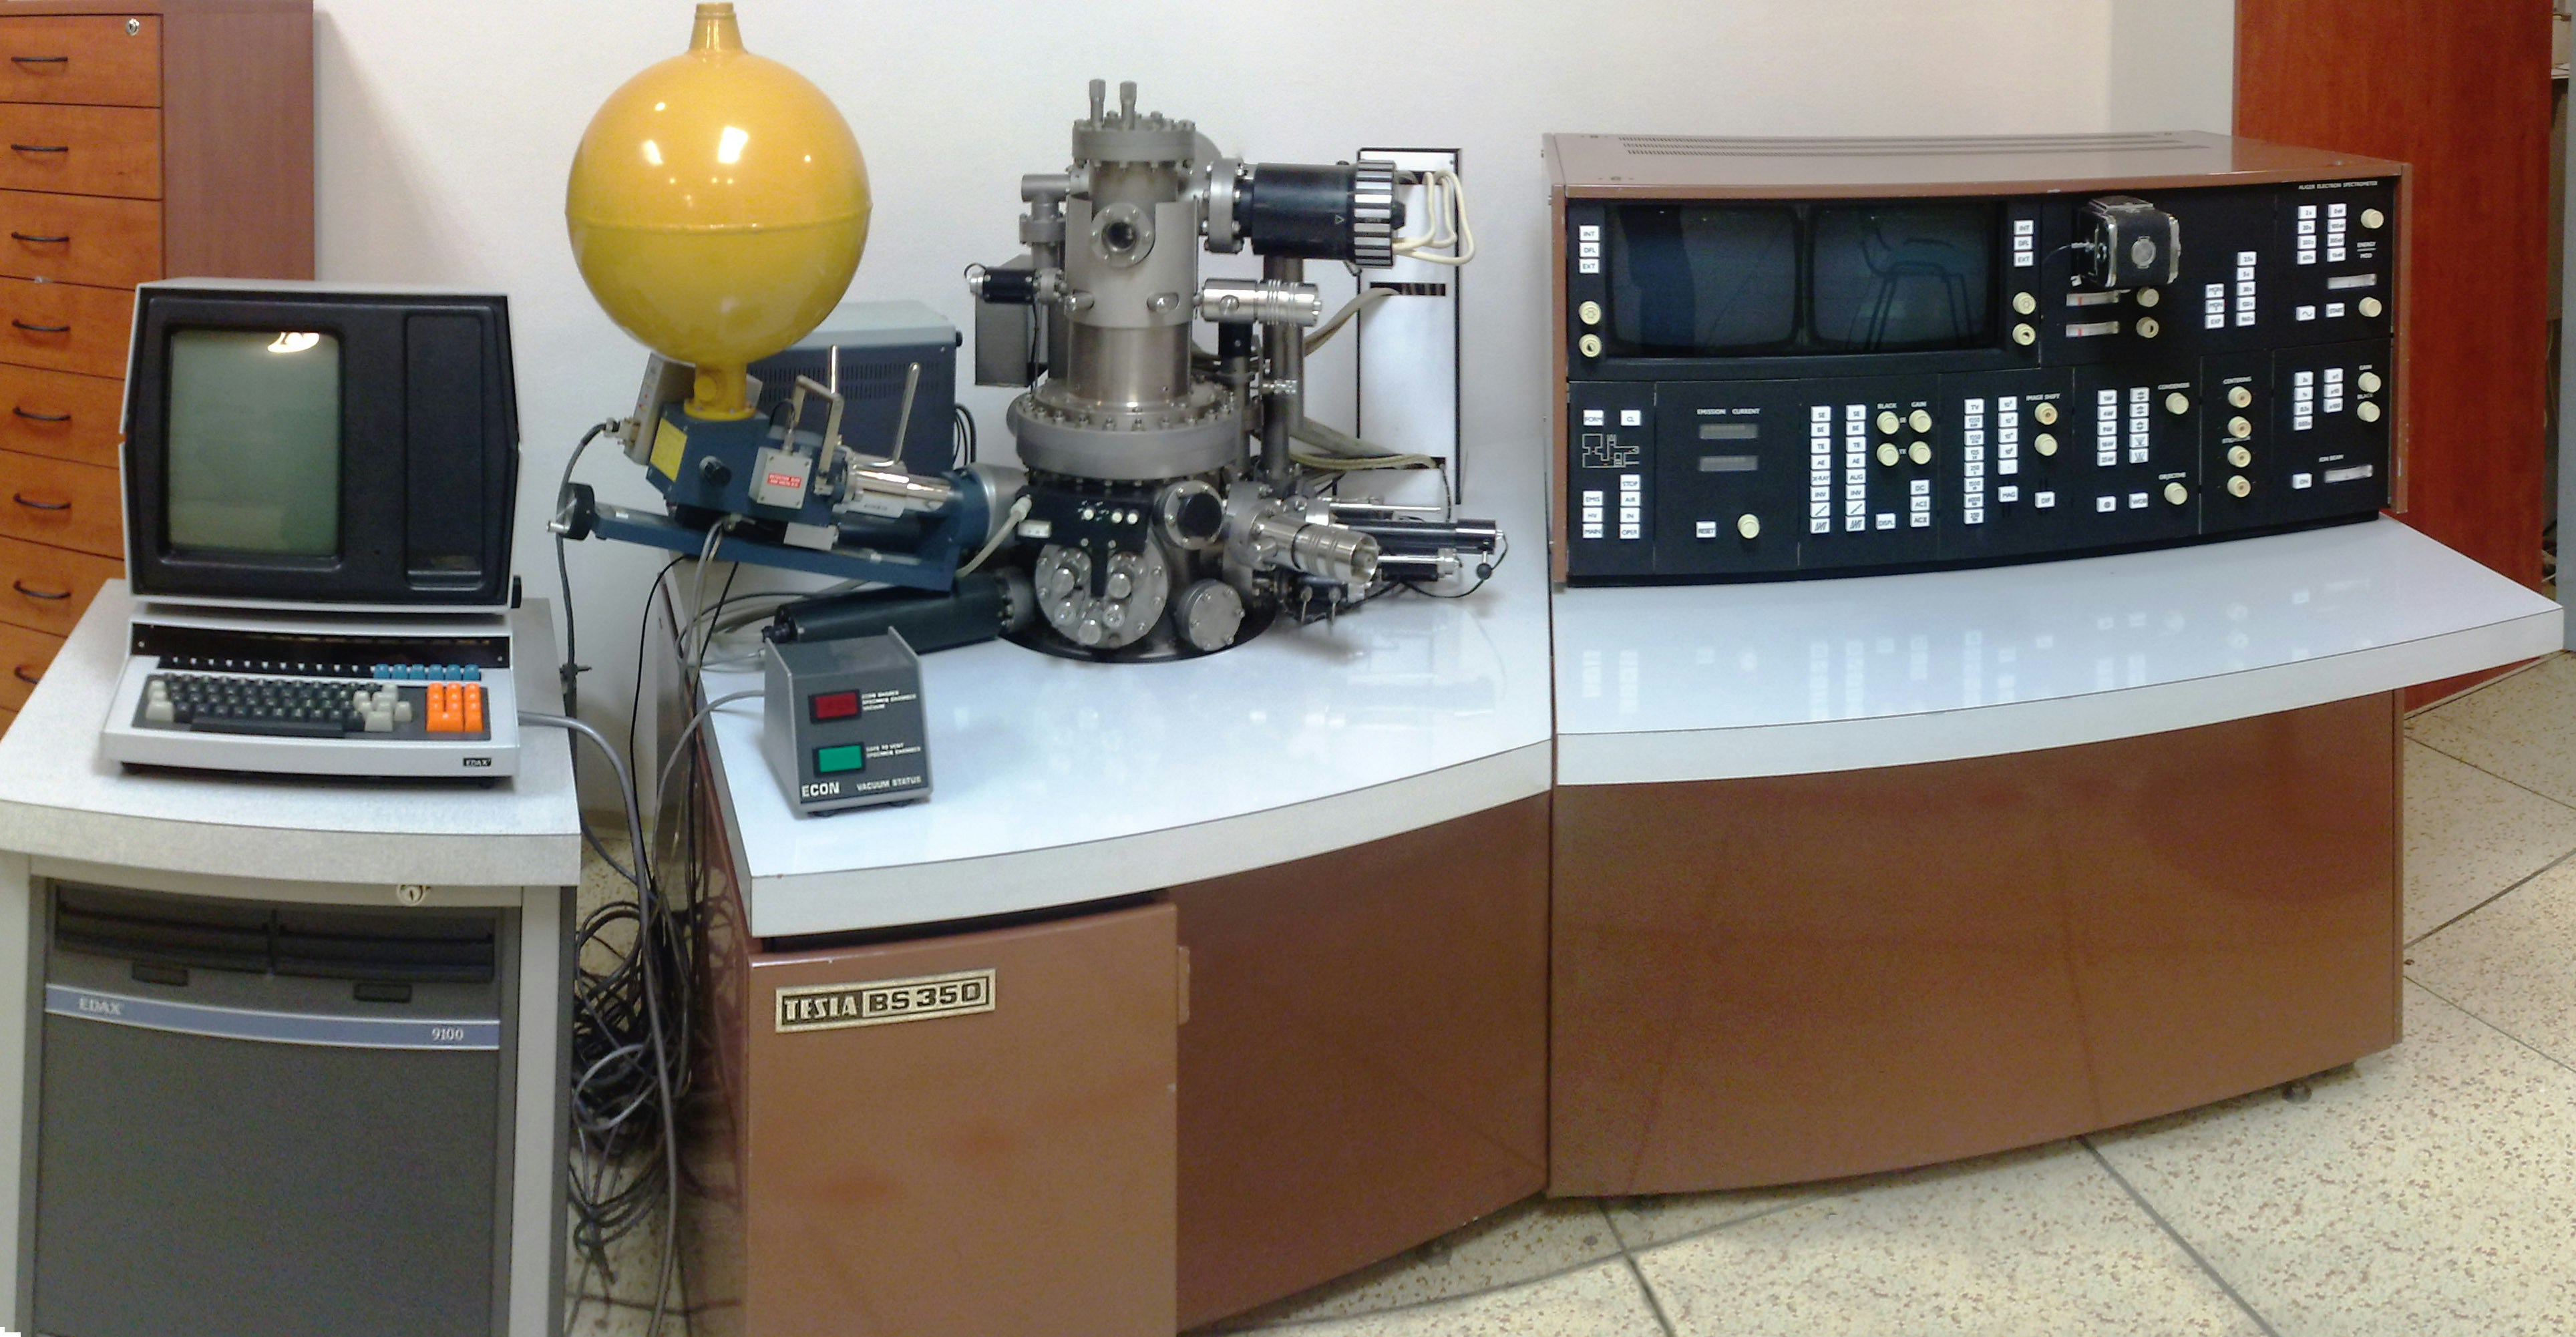 An old Tesla scanning electron microscope. Not a coffee maker.

<p>The Tesla BS350 SEM between 1976 and 1989. With an EDAX 9100 detector.</p>
<p>This microscope had a field emission gun as the electron source, and was one of the first microscopes to do so. Only 56 of these were made.</p>
<p>The monitor on the left is in portrait mode to better show the xray peaks of the material being analyzed.” style=”max-width:400px;float:left;padding:10px 10px 10px 0px;border:0px;”></a><span style=